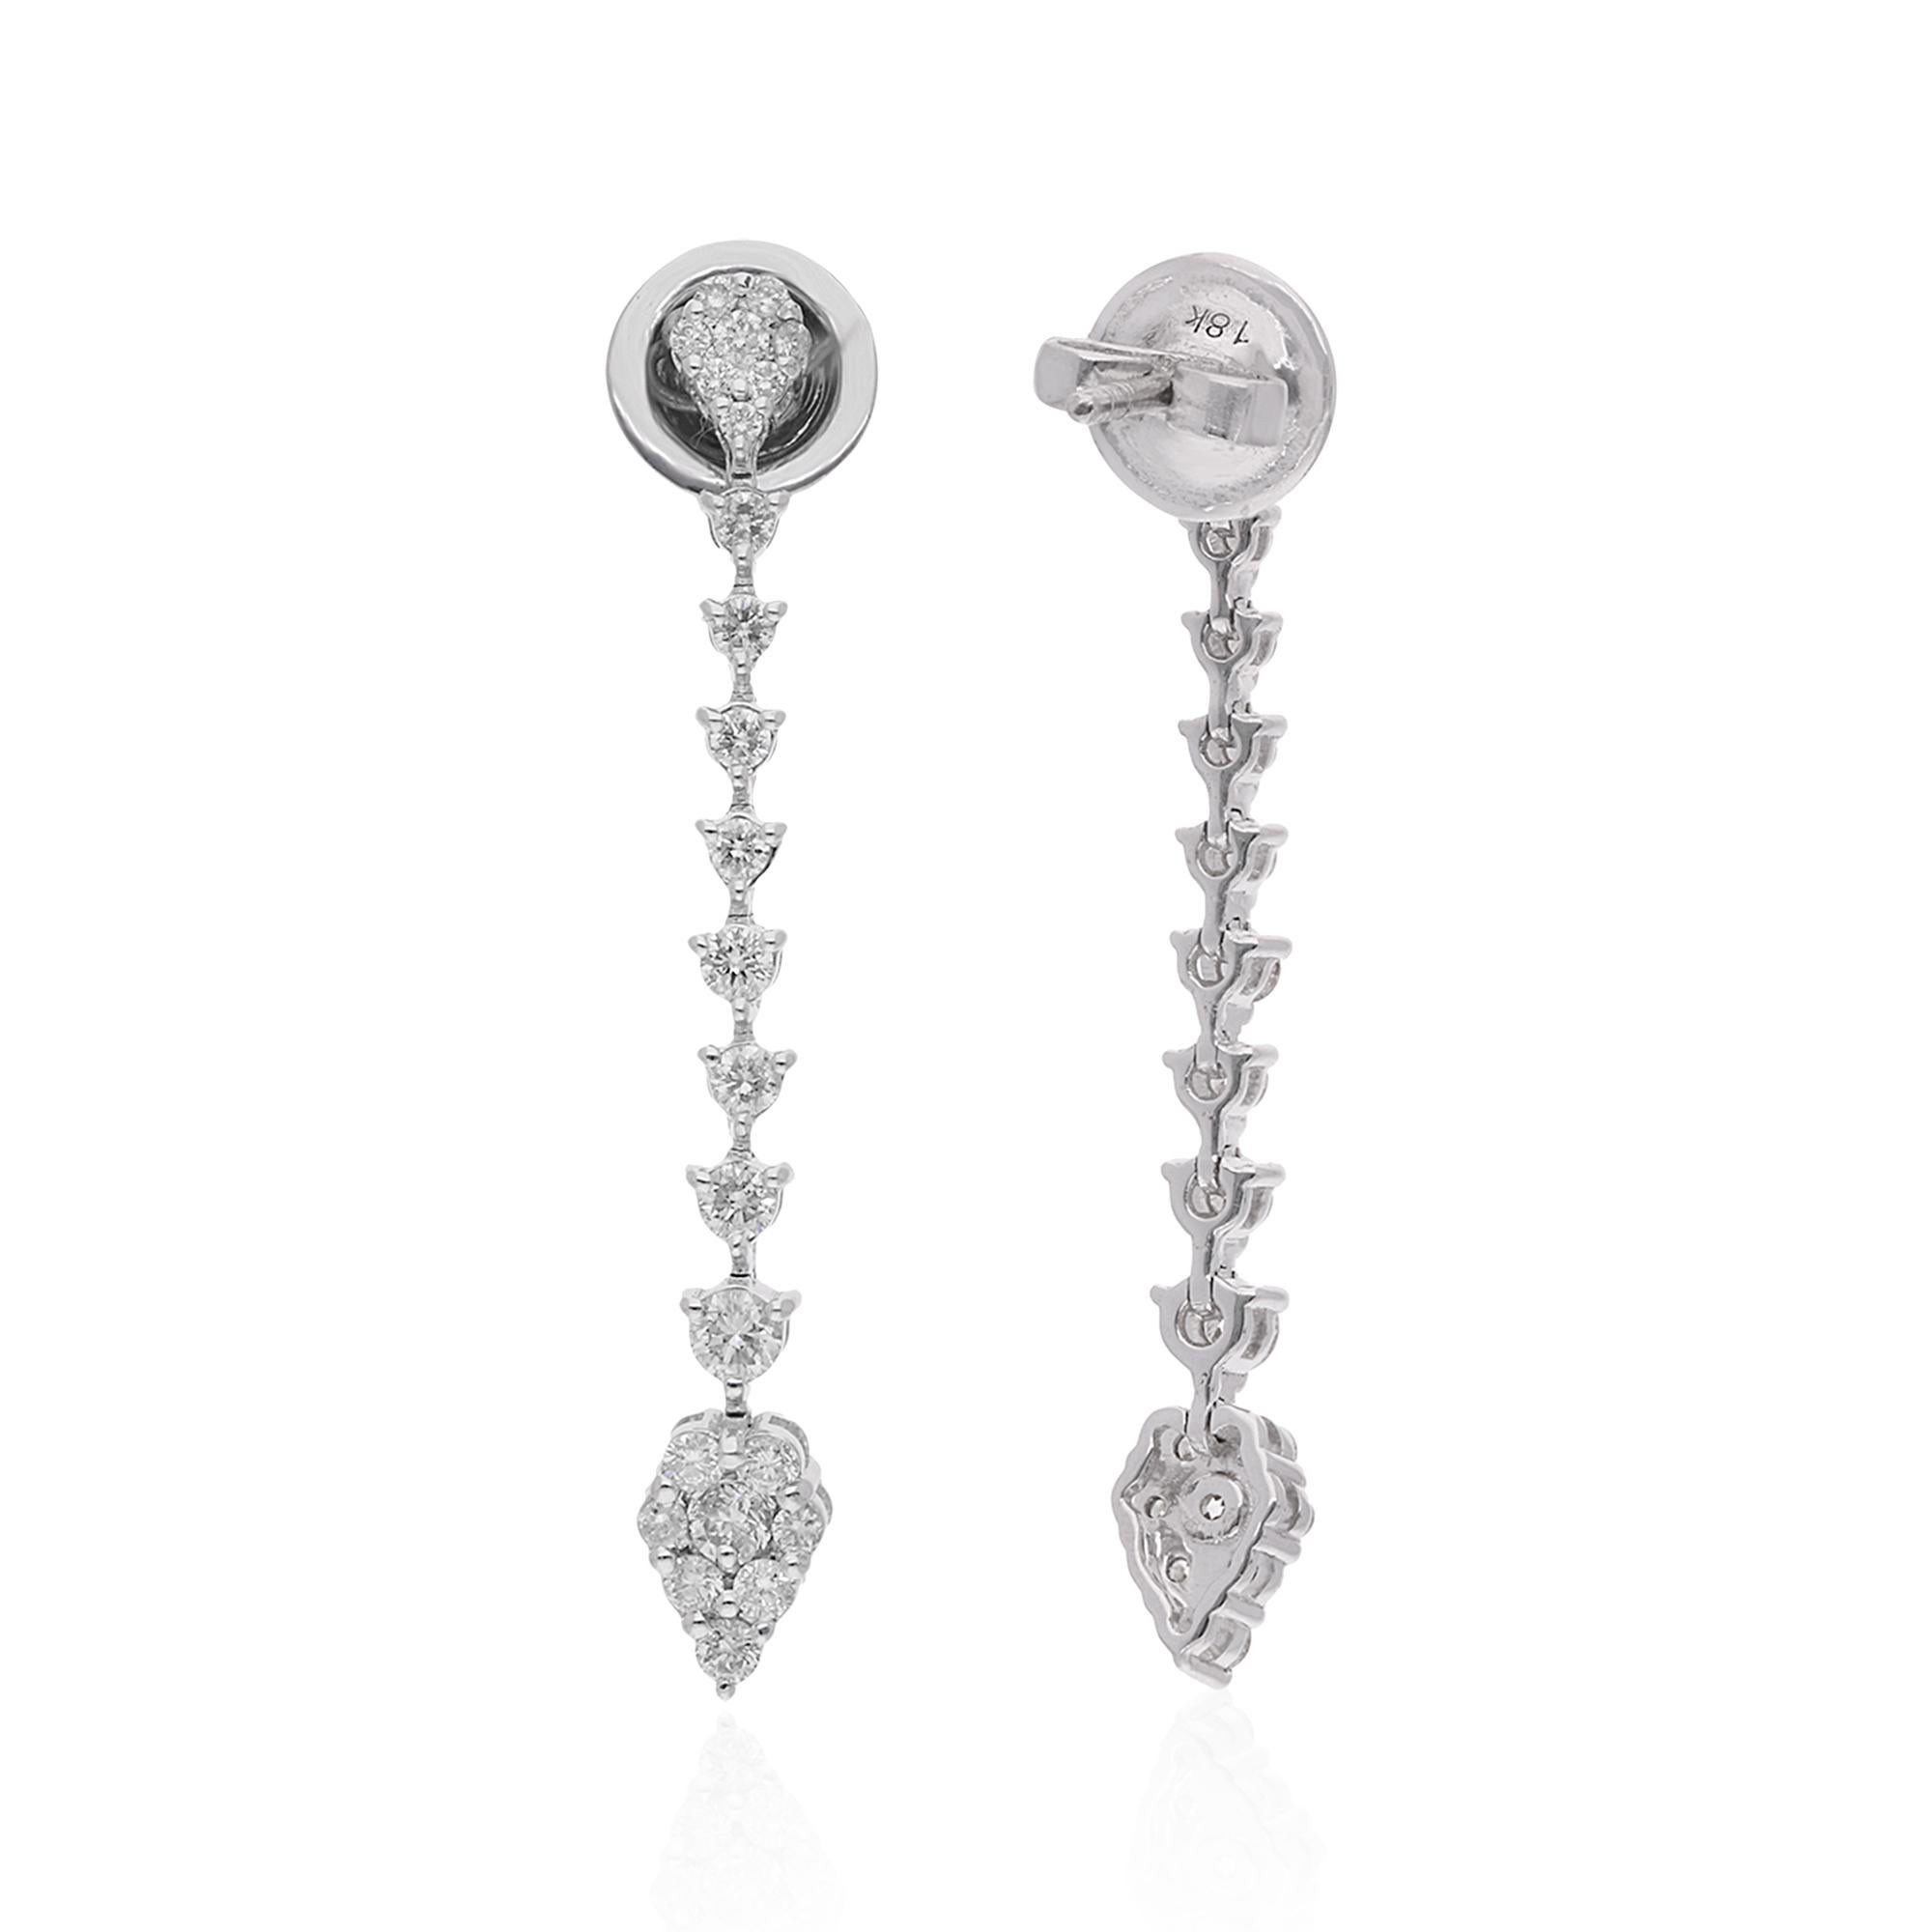 Crafted with precision and attention to detail, the earrings are handmade by skilled artisans, ensuring the highest level of quality and craftsmanship. Each diamond is carefully set to maximize its brilliance and create a stunning visual